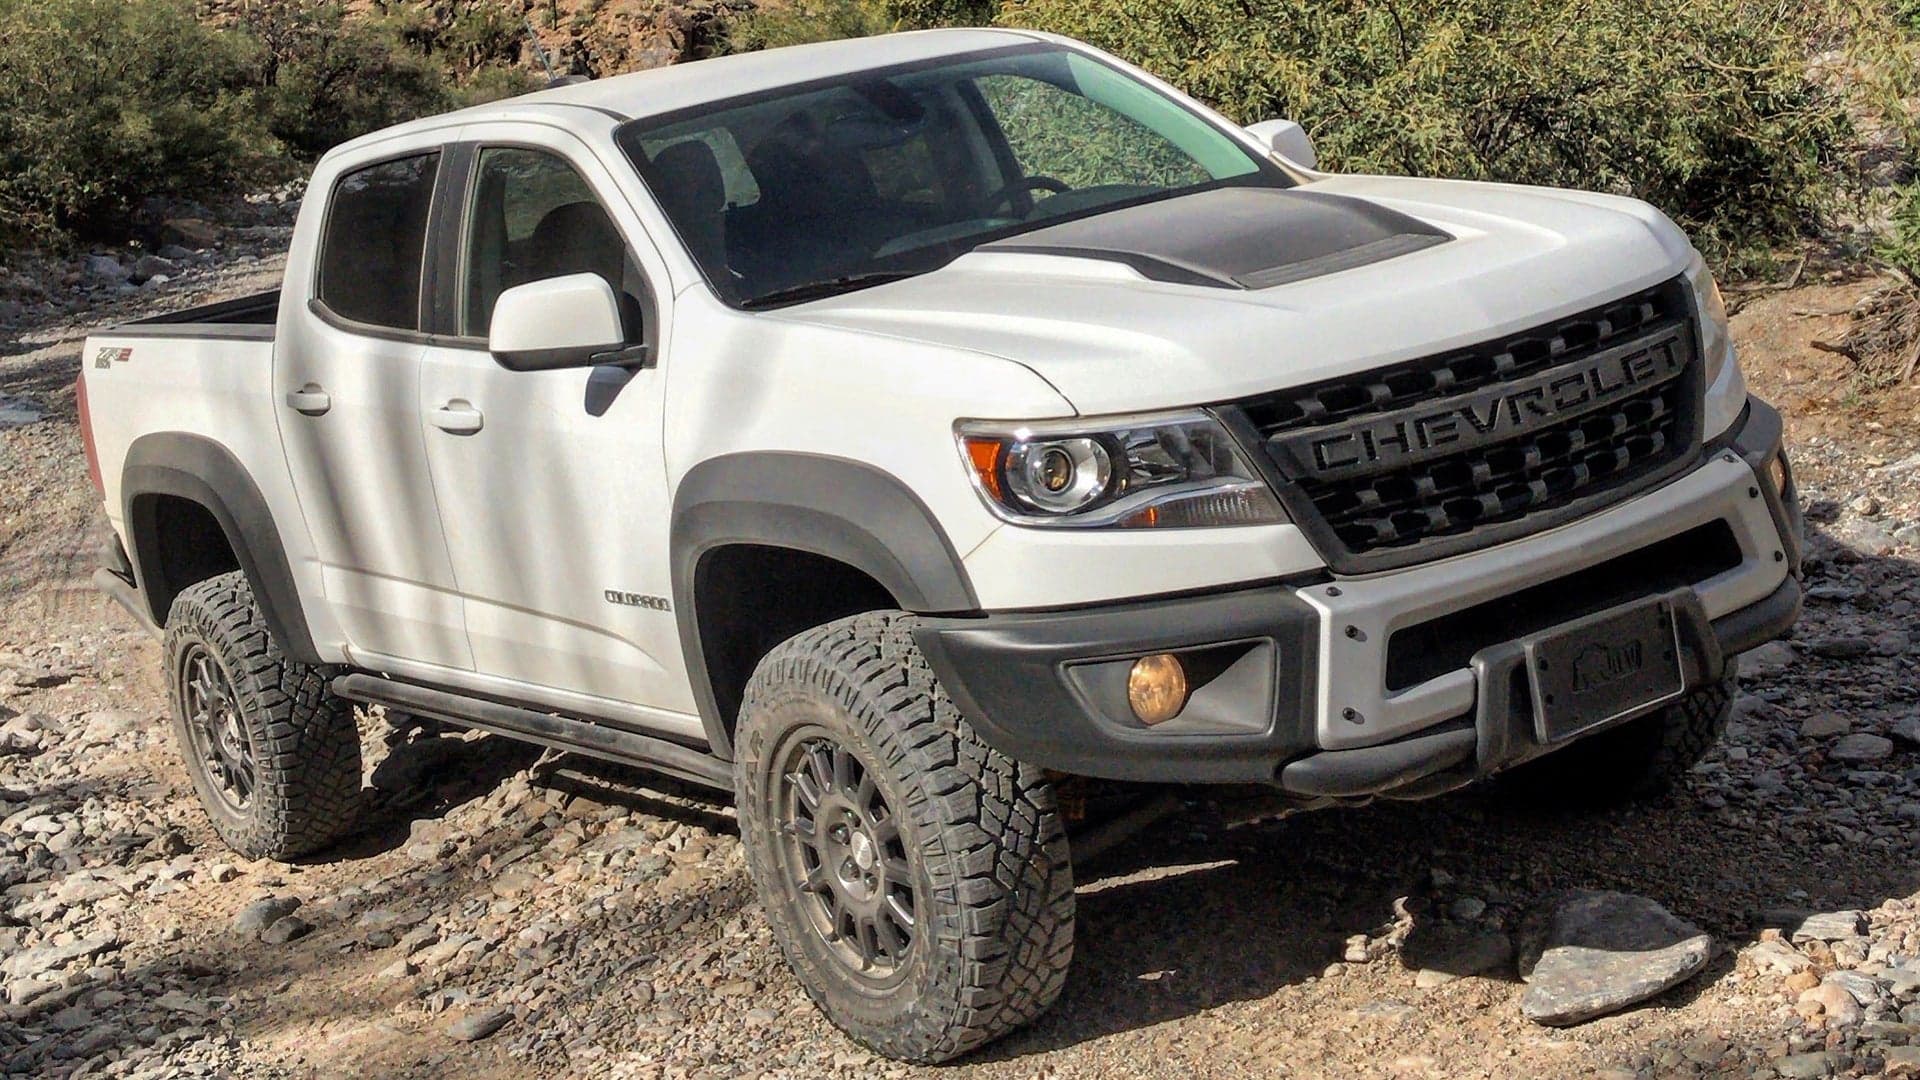 2019 Chevrolet Colorado ZR2 Bison First Drive: AEV Makes This Tough Little Chevy Even Tougher